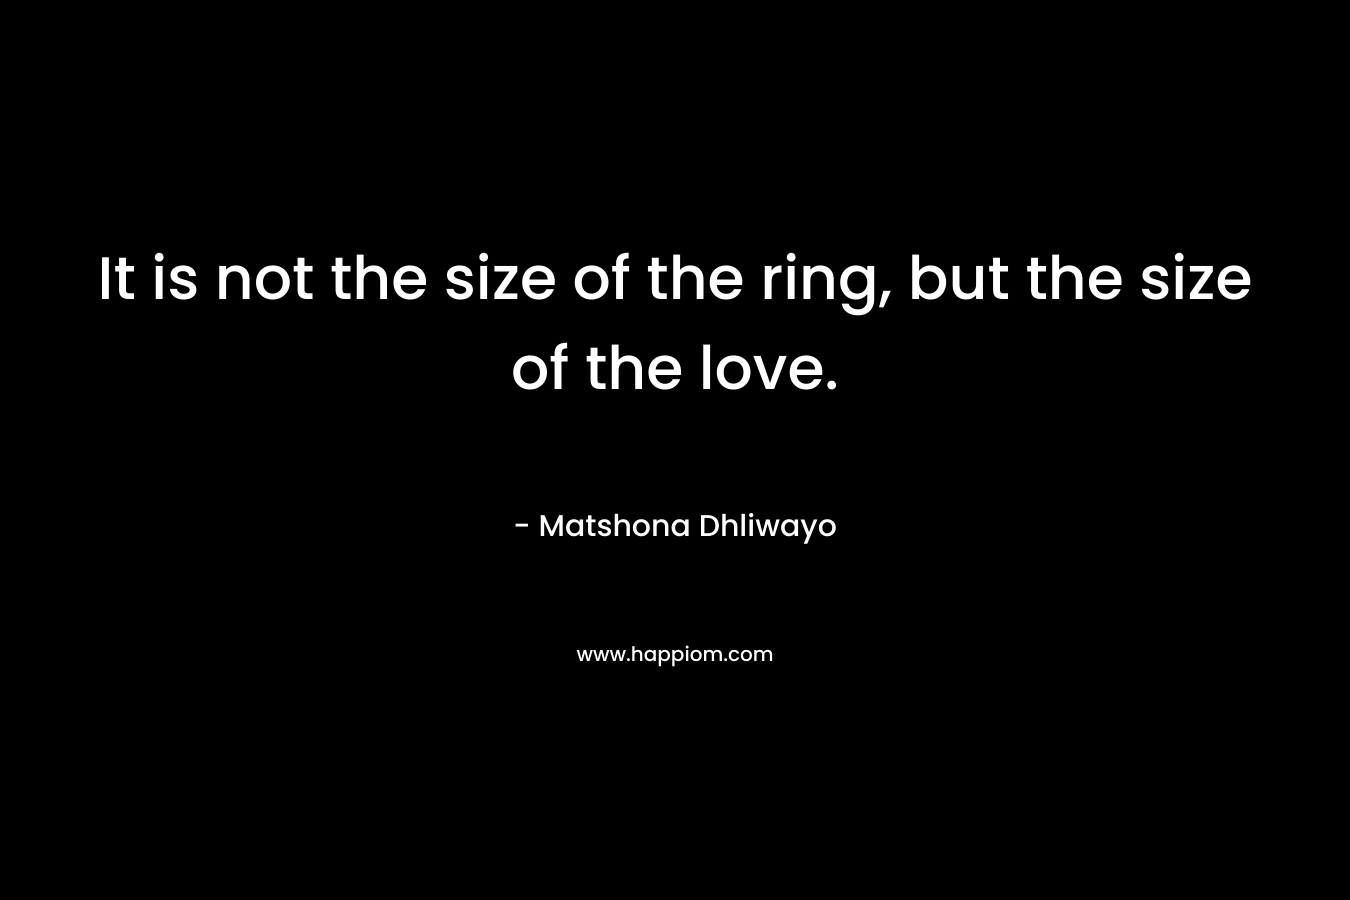 It is not the size of the ring, but the size of the love. – Matshona Dhliwayo